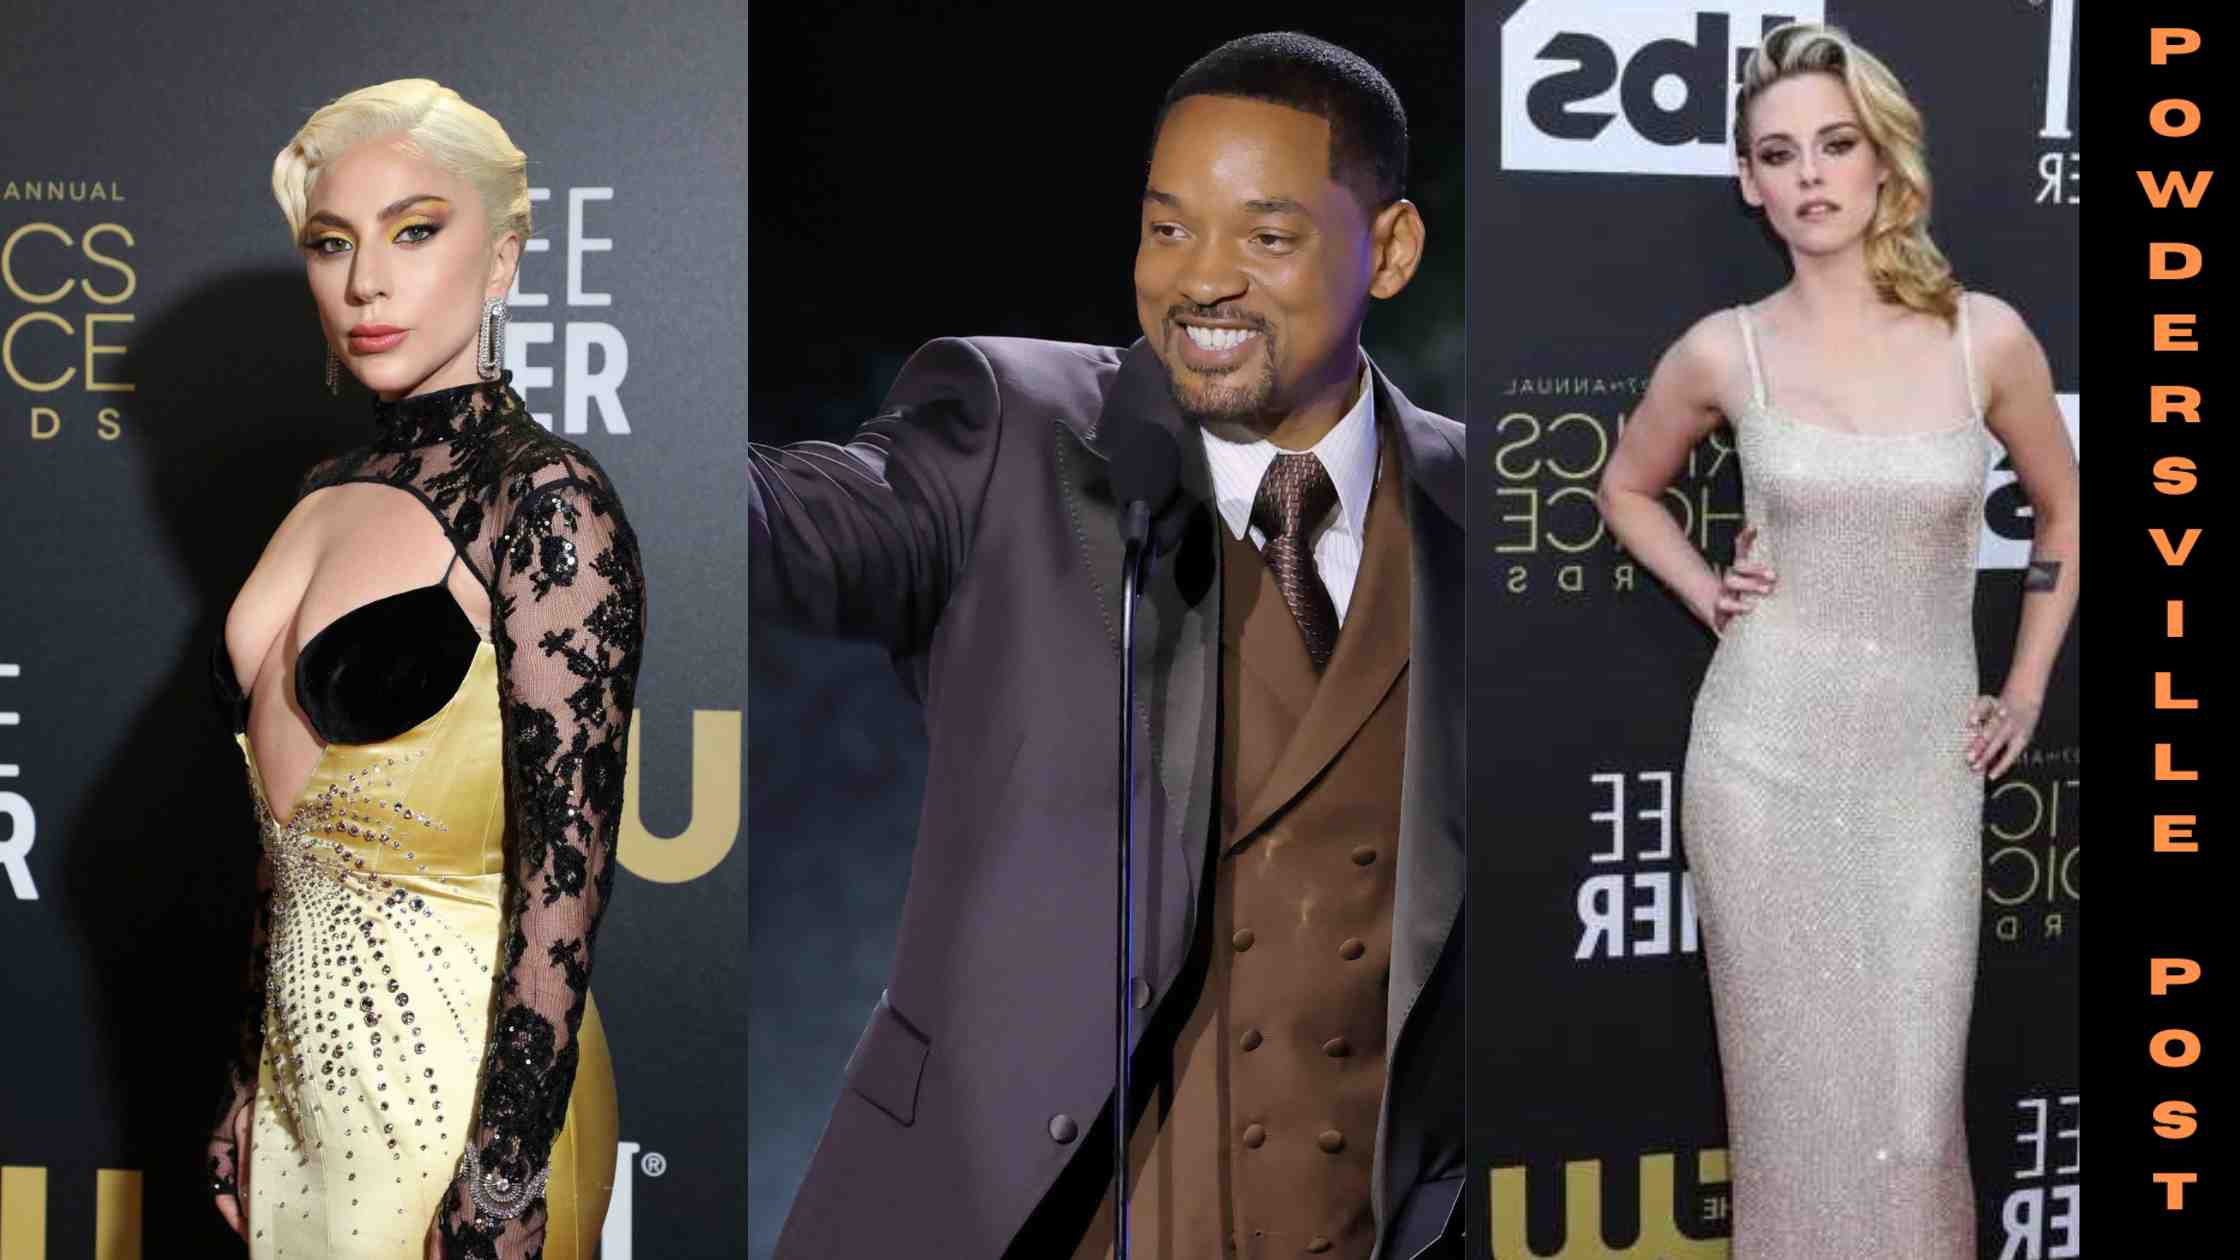 The Red Carpet Entries For The Critics' Choice Awards 2022 Features Will Smith, Lady Gaga, And Kristen Stewart